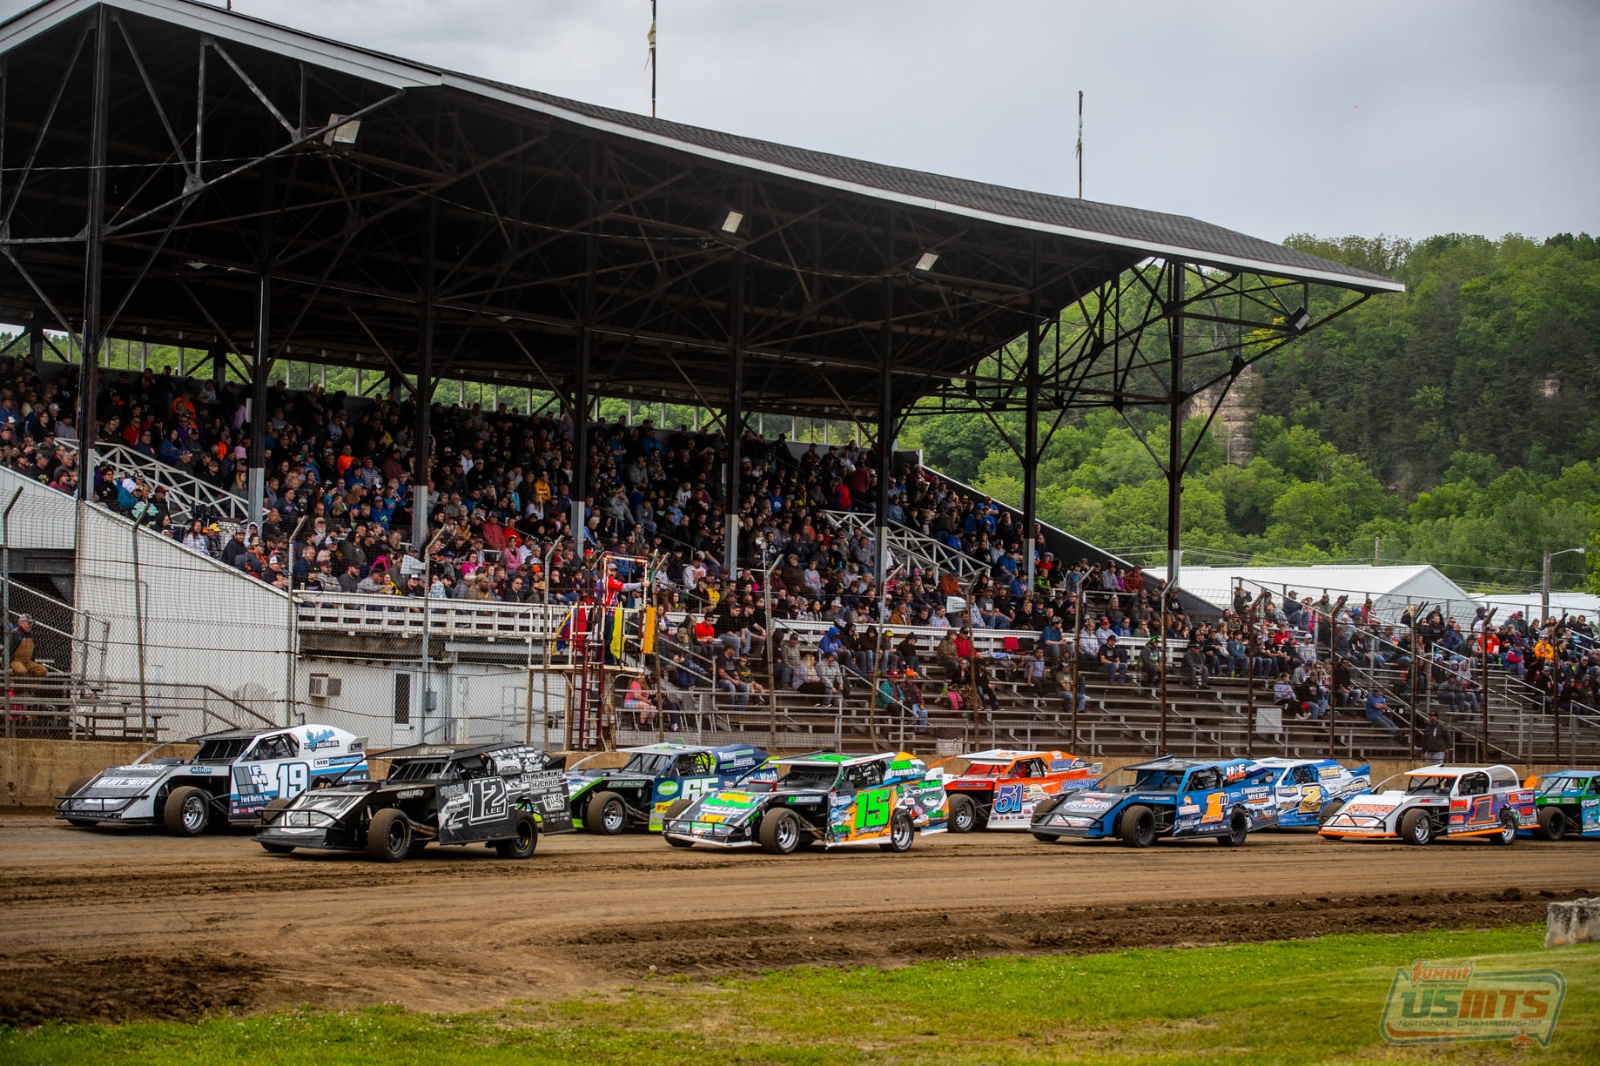 13th Annual USMTS Nordic Nationals presented by PBM Performance Products | Upper Iowa Speedway